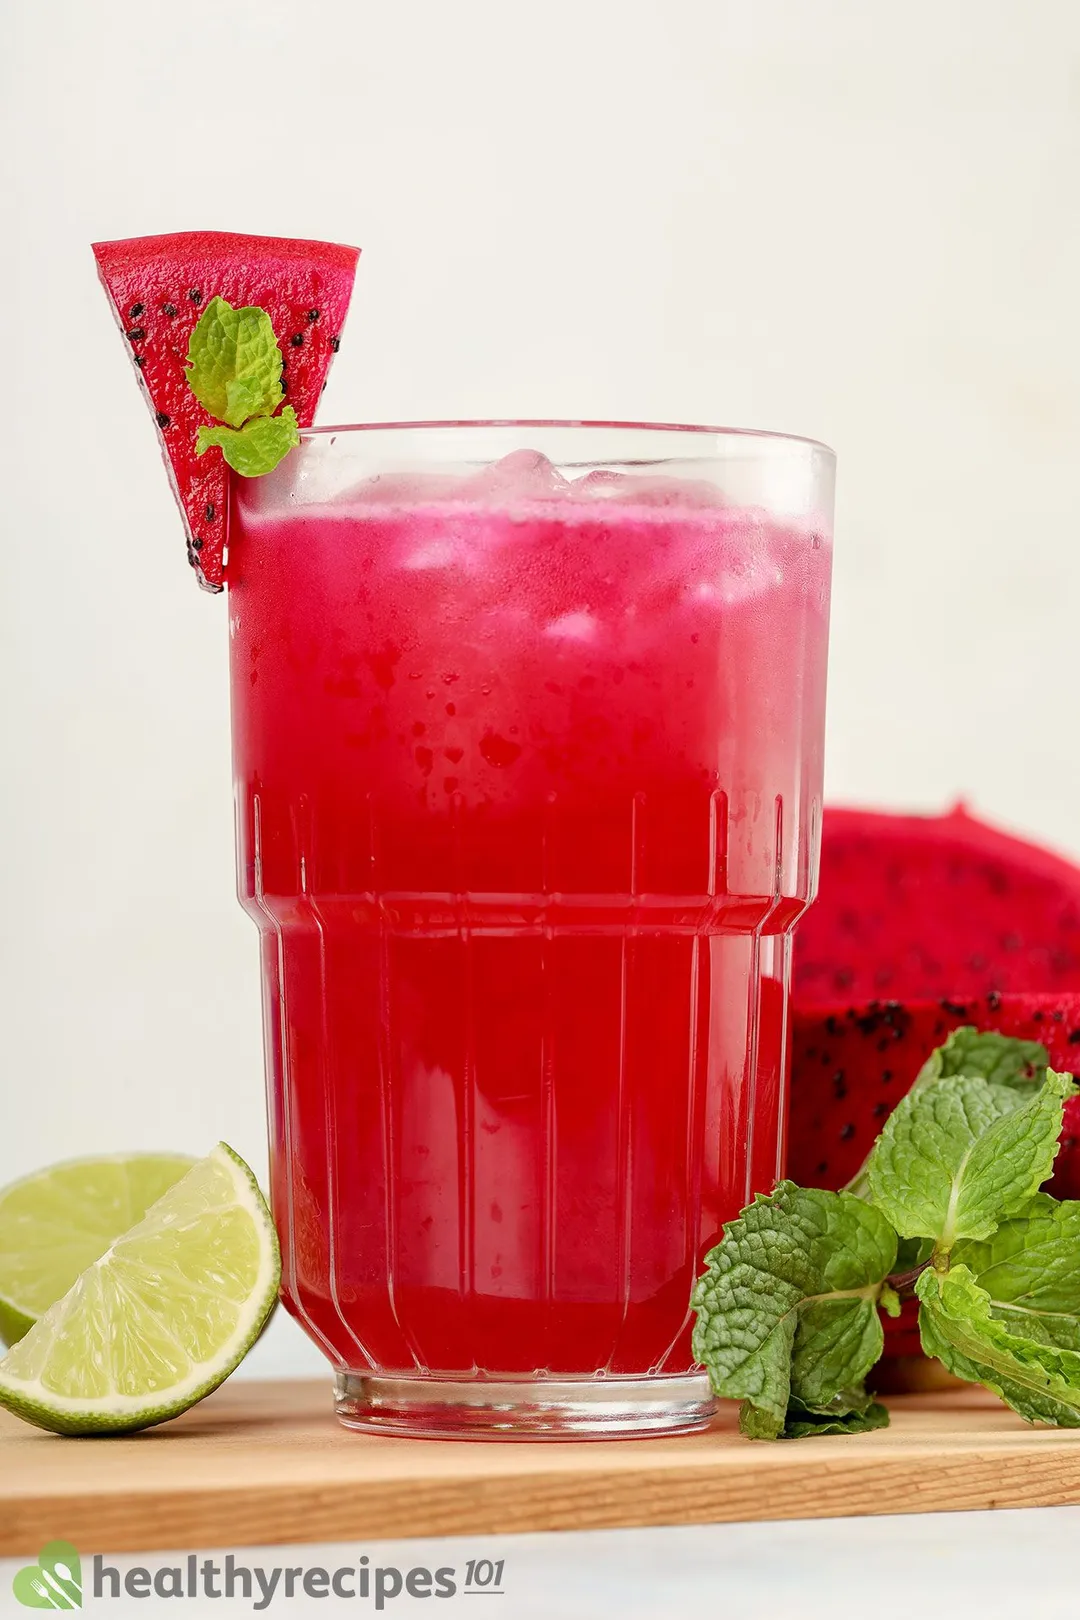 A vibrant pink glass of dragon fruit juice laid on a wooden chopping board with lime wedges, half a dragon jucie, and mint leaves.